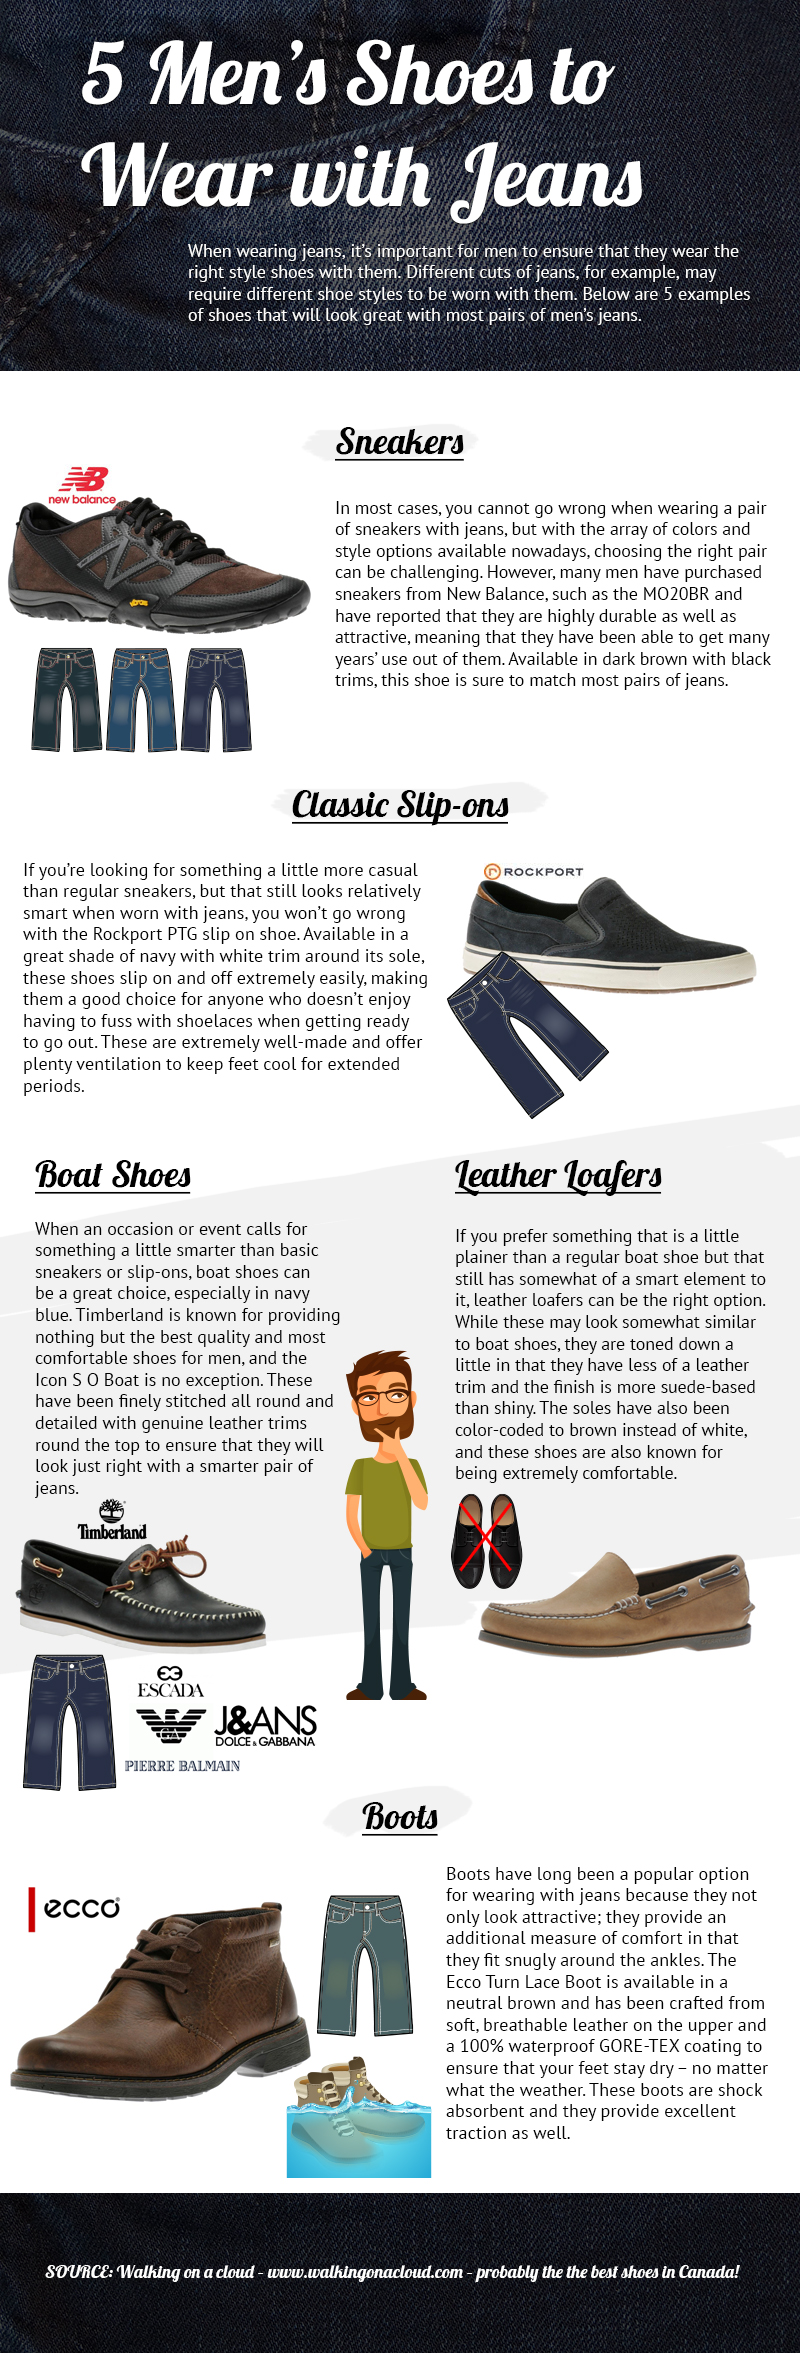 5-Men’s-Shoes-to-Wear-with-Jeans